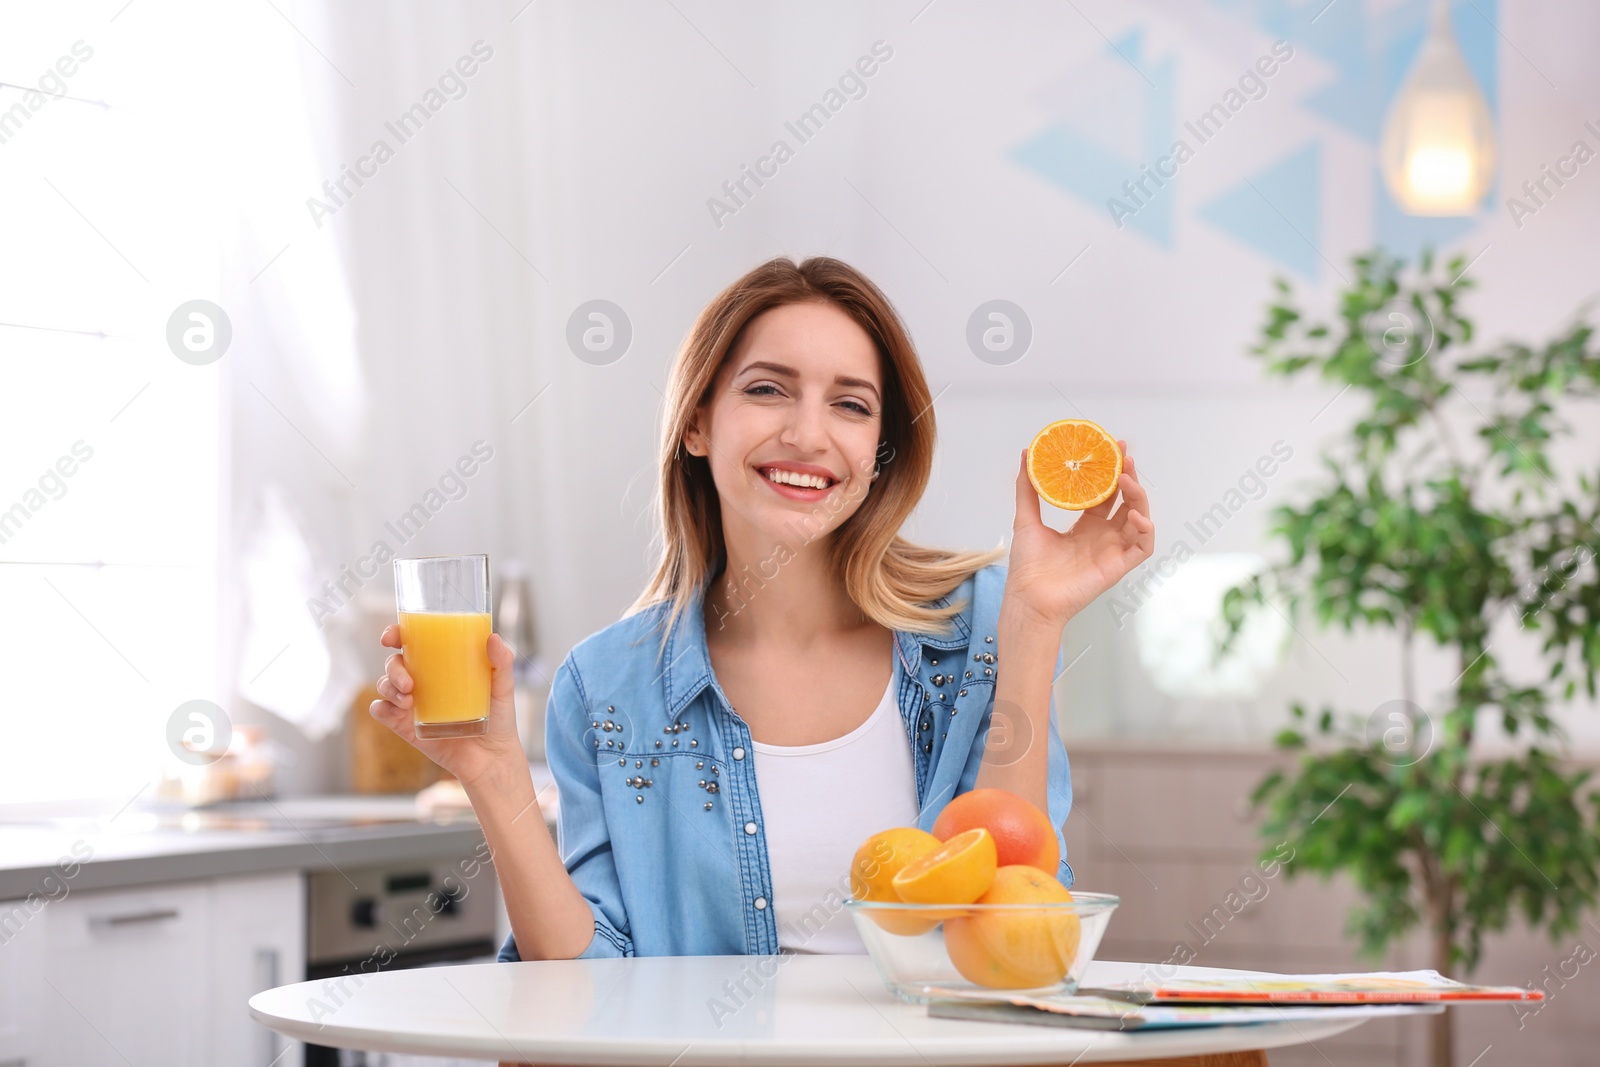 Photo of Happy young woman with glass of juice and orange at table in kitchen. Healthy diet